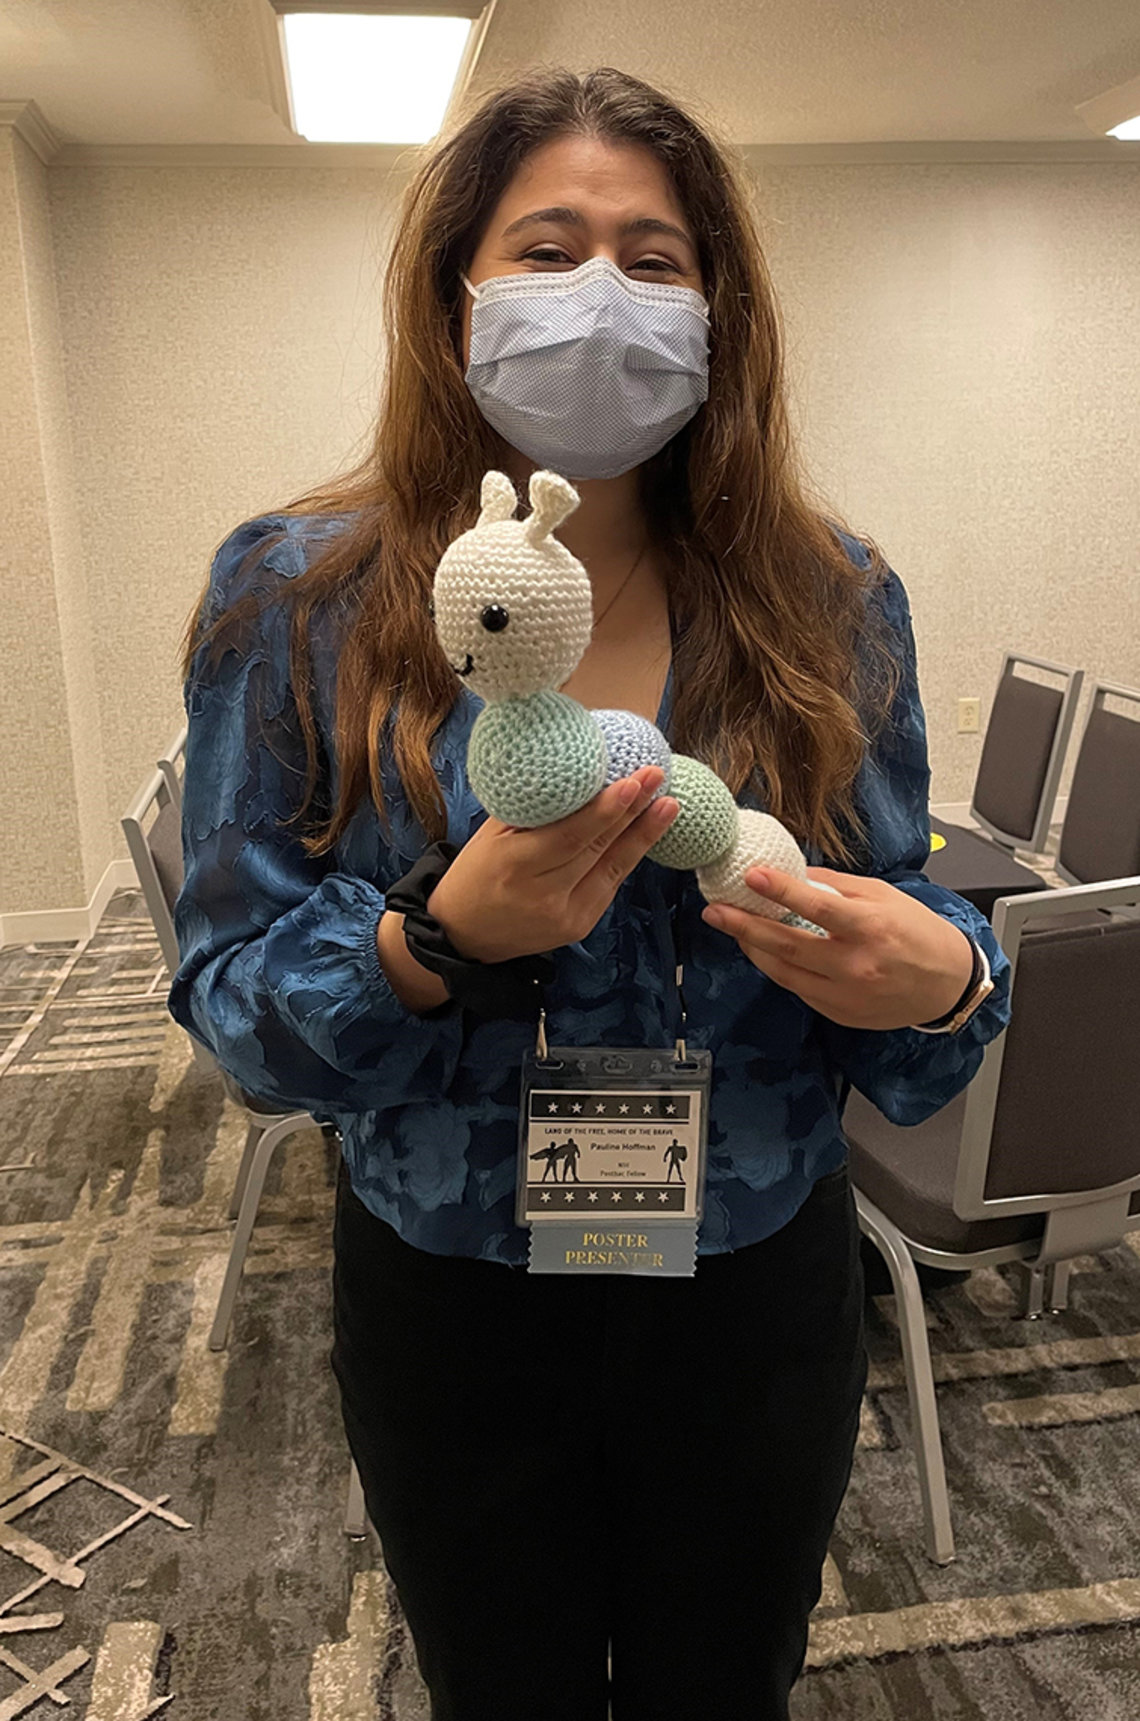 Hoffman, wearing mask, stands in conference room holding a blue, green and white caterpillar she crocheted.